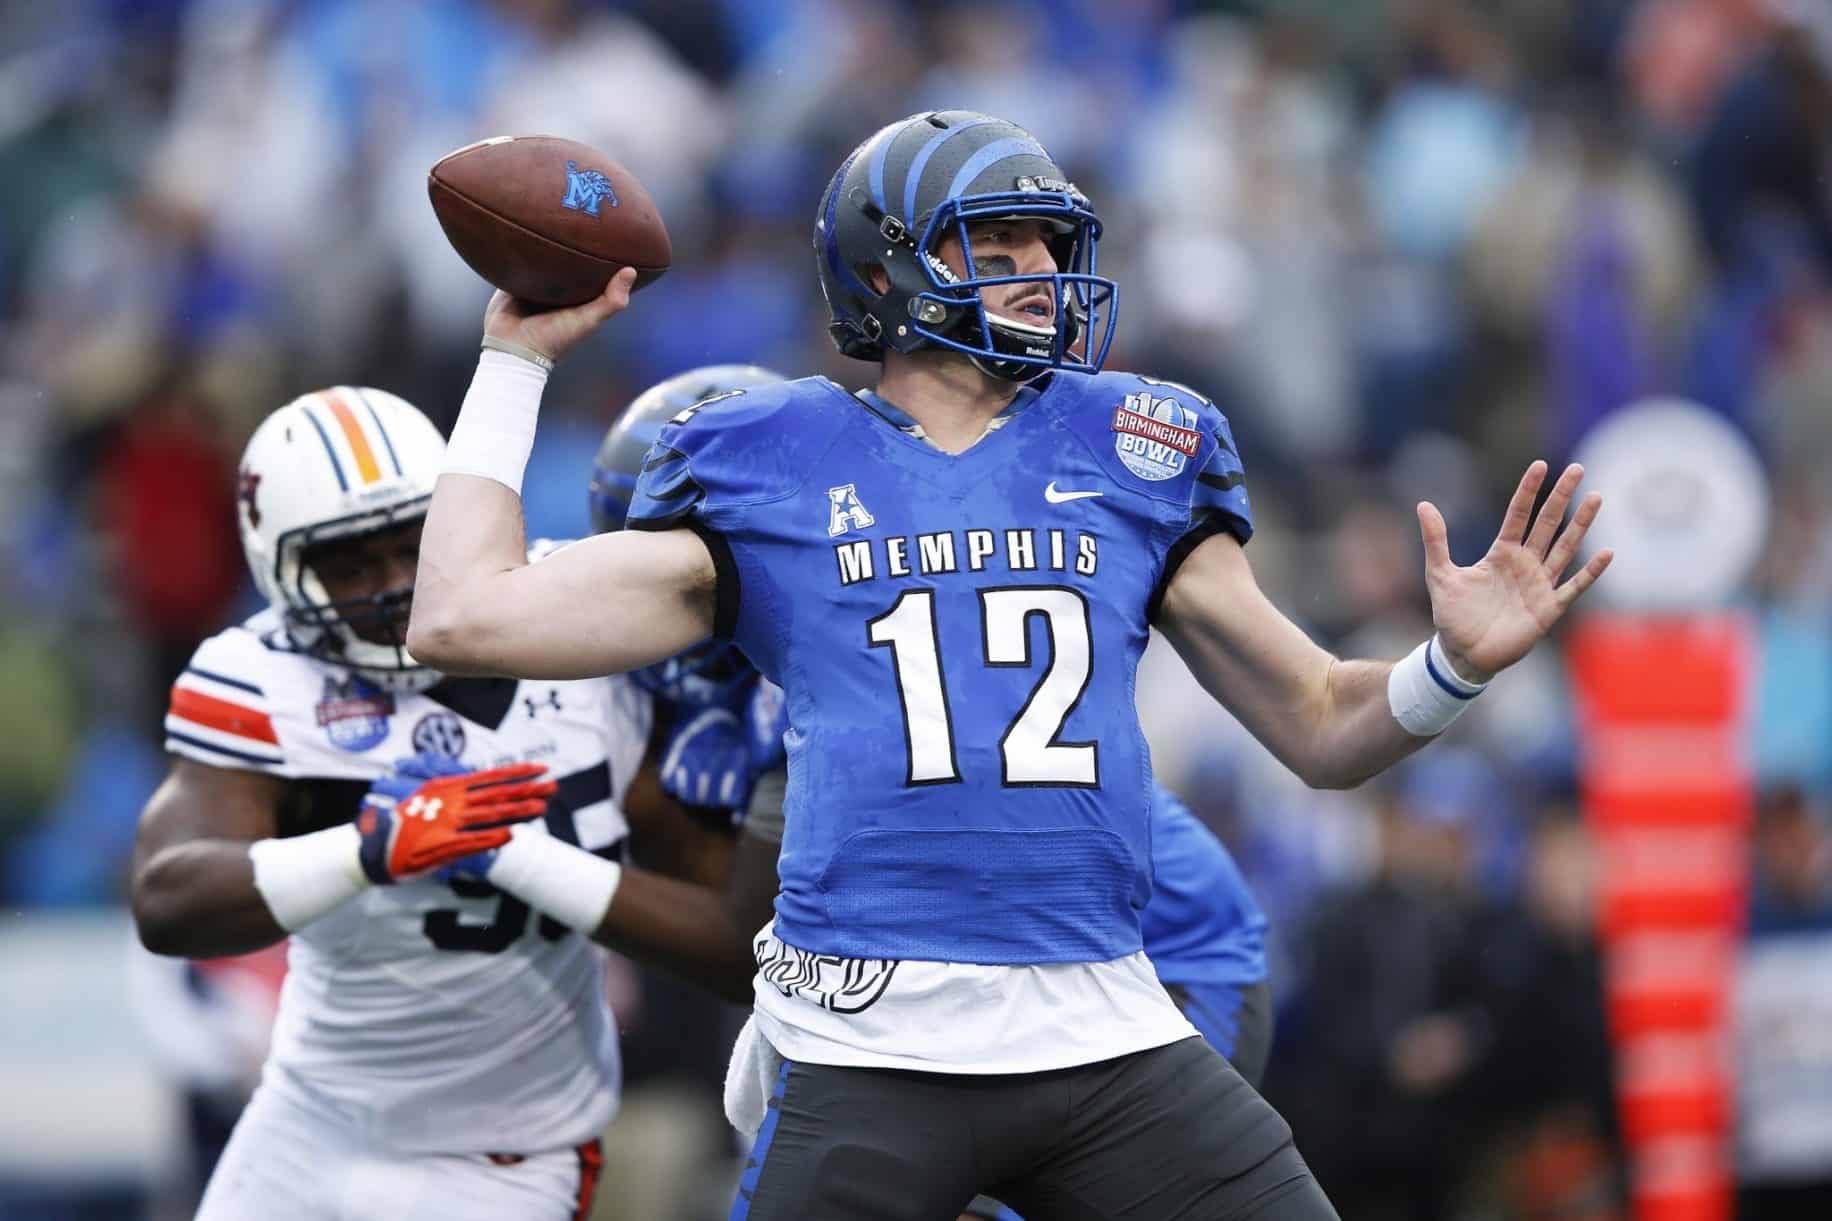 Quarterback Paxton Lynch during his days at the University of Memphis (Photo by Joe Robbins/Getty Images)